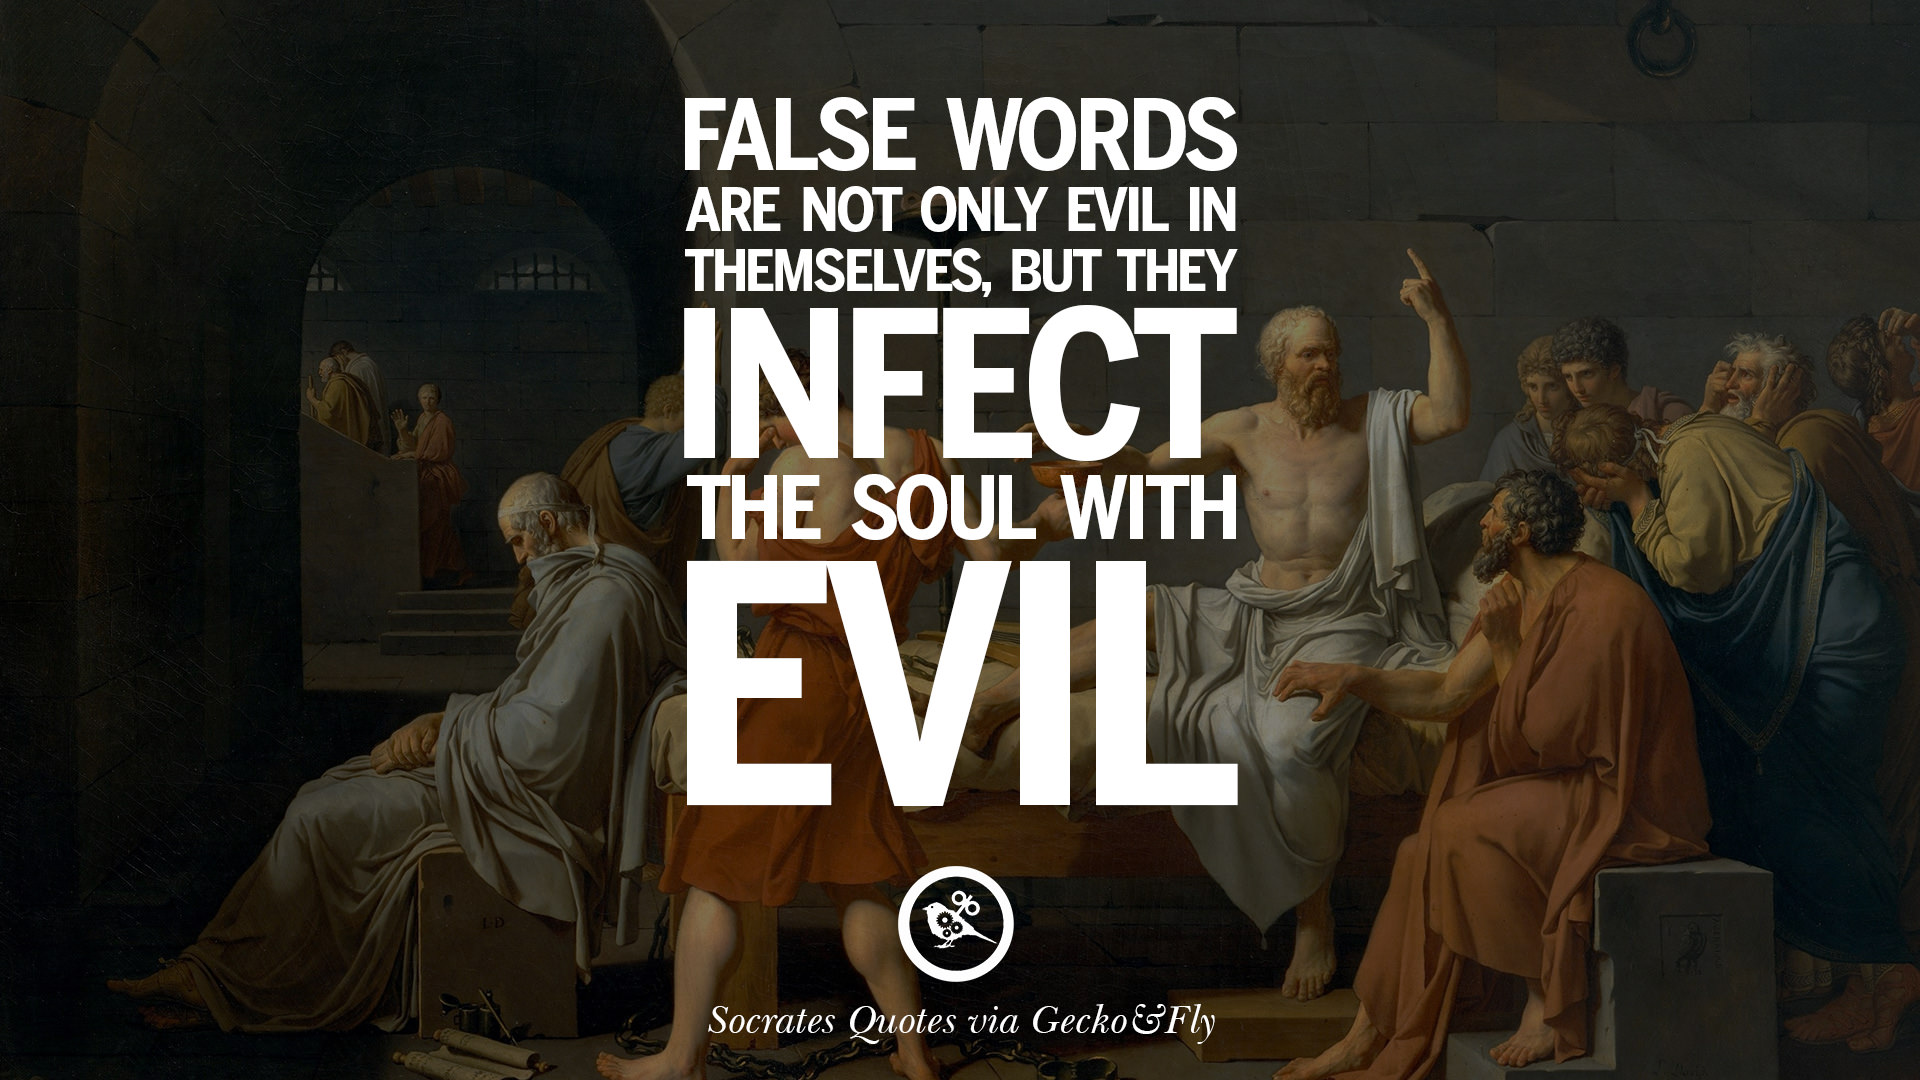 False words are not only evil in themselves but they infect the soul with evil